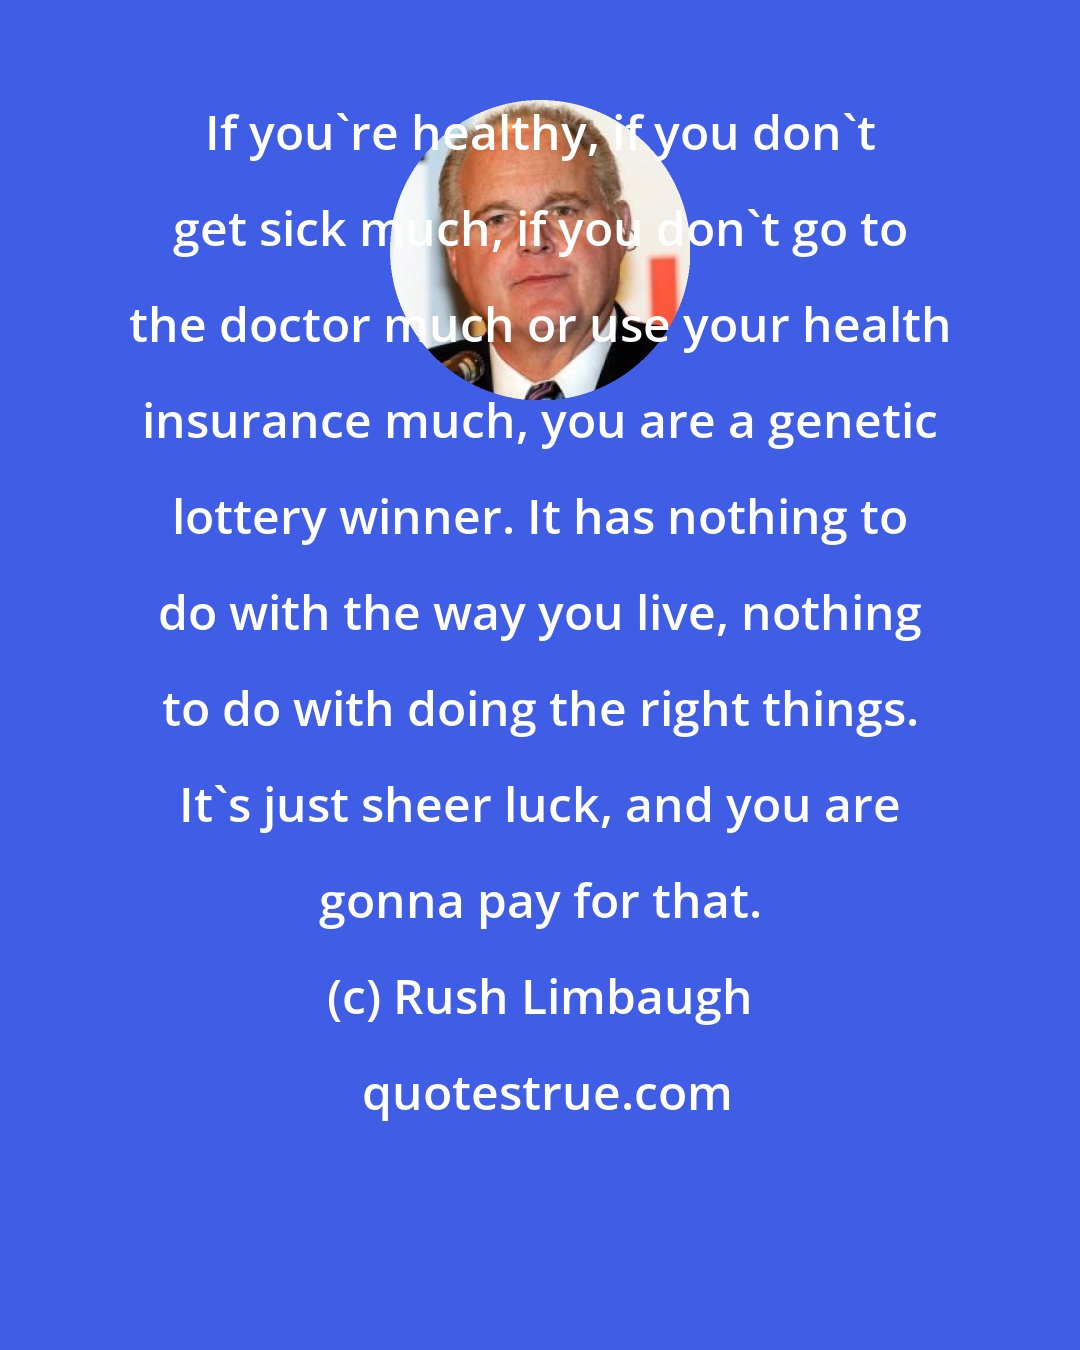 Rush Limbaugh: If you're healthy, if you don't get sick much, if you don't go to the doctor much or use your health insurance much, you are a genetic lottery winner. It has nothing to do with the way you live, nothing to do with doing the right things. It's just sheer luck, and you are gonna pay for that.